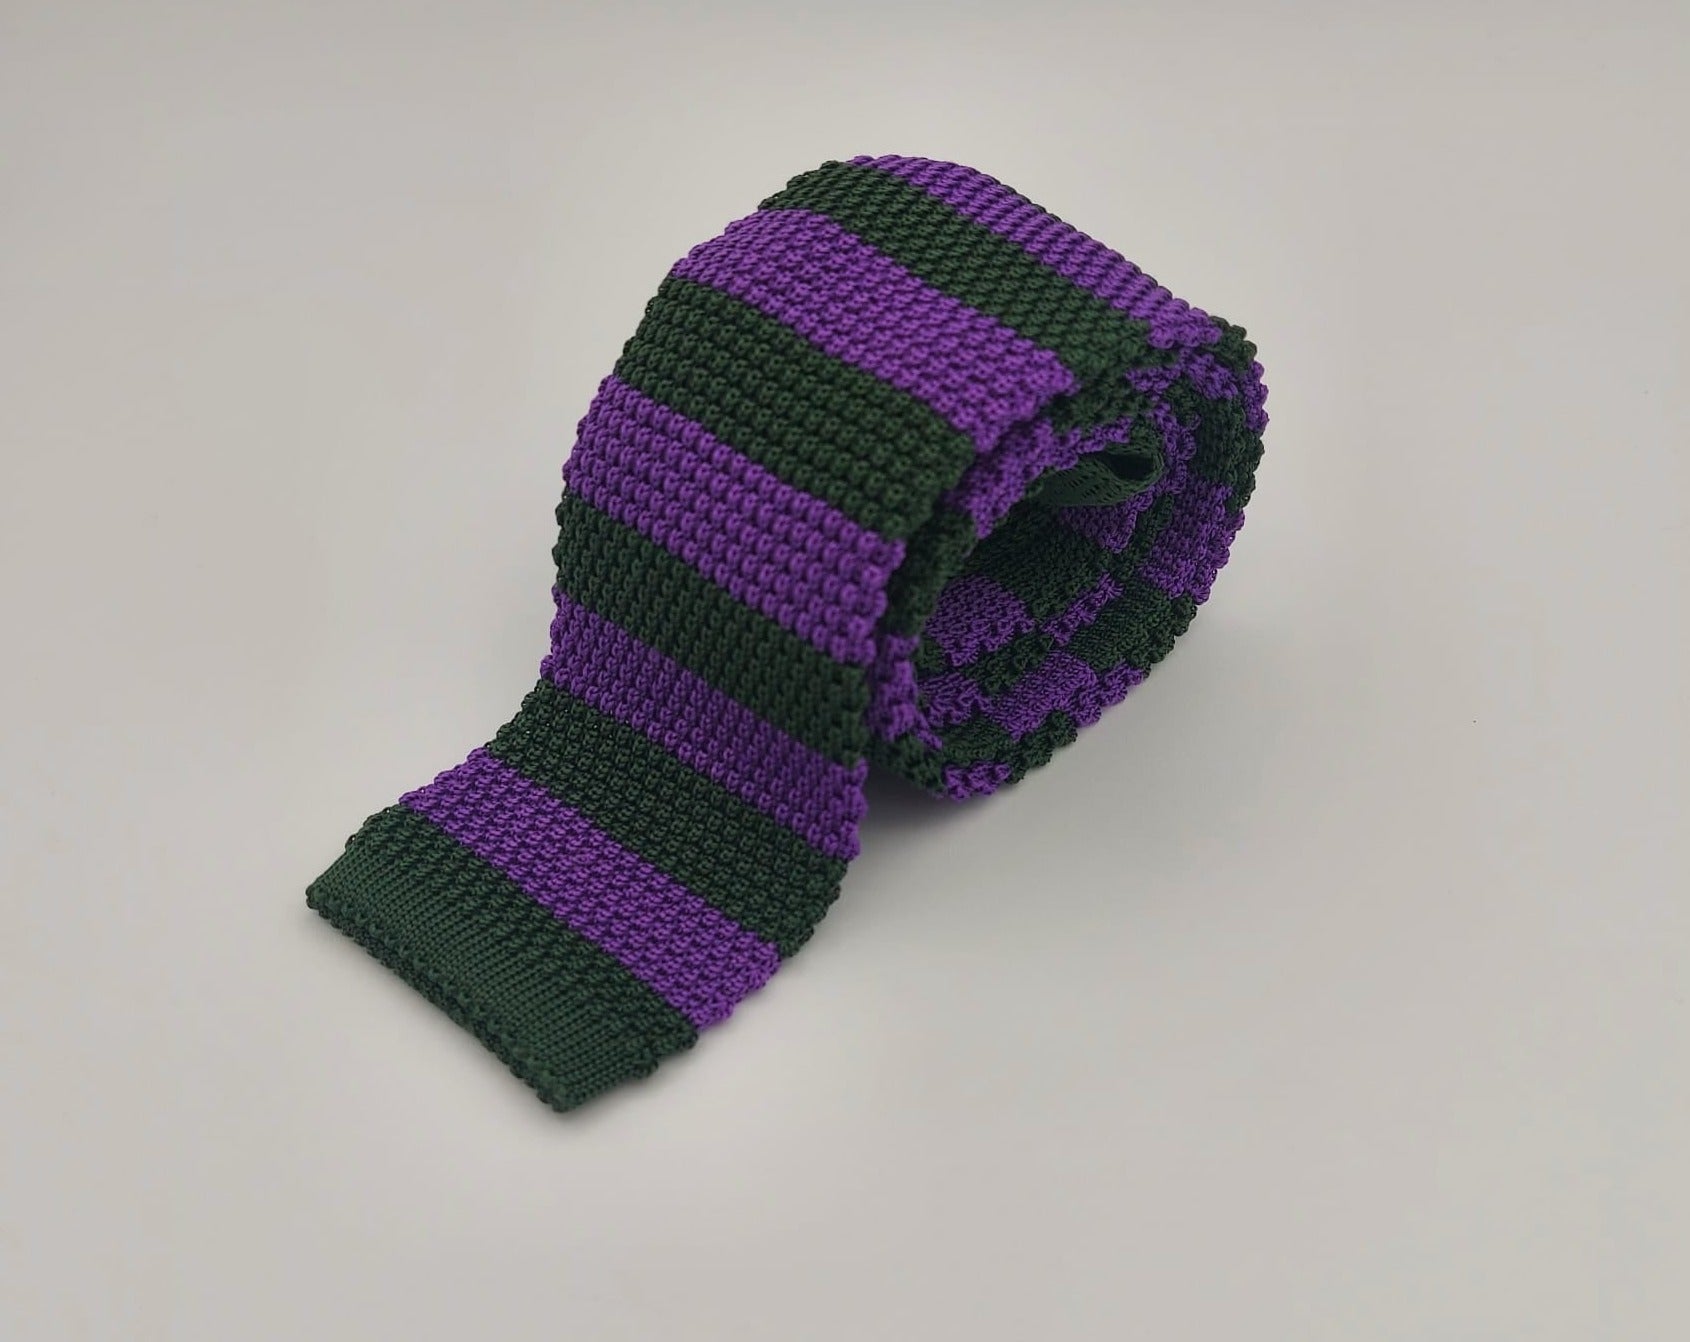 Cruciani & Bella 100% Knitted Silk Green and Purple knitted tie Handmade in Italy 6 cm x 145 cm #6369